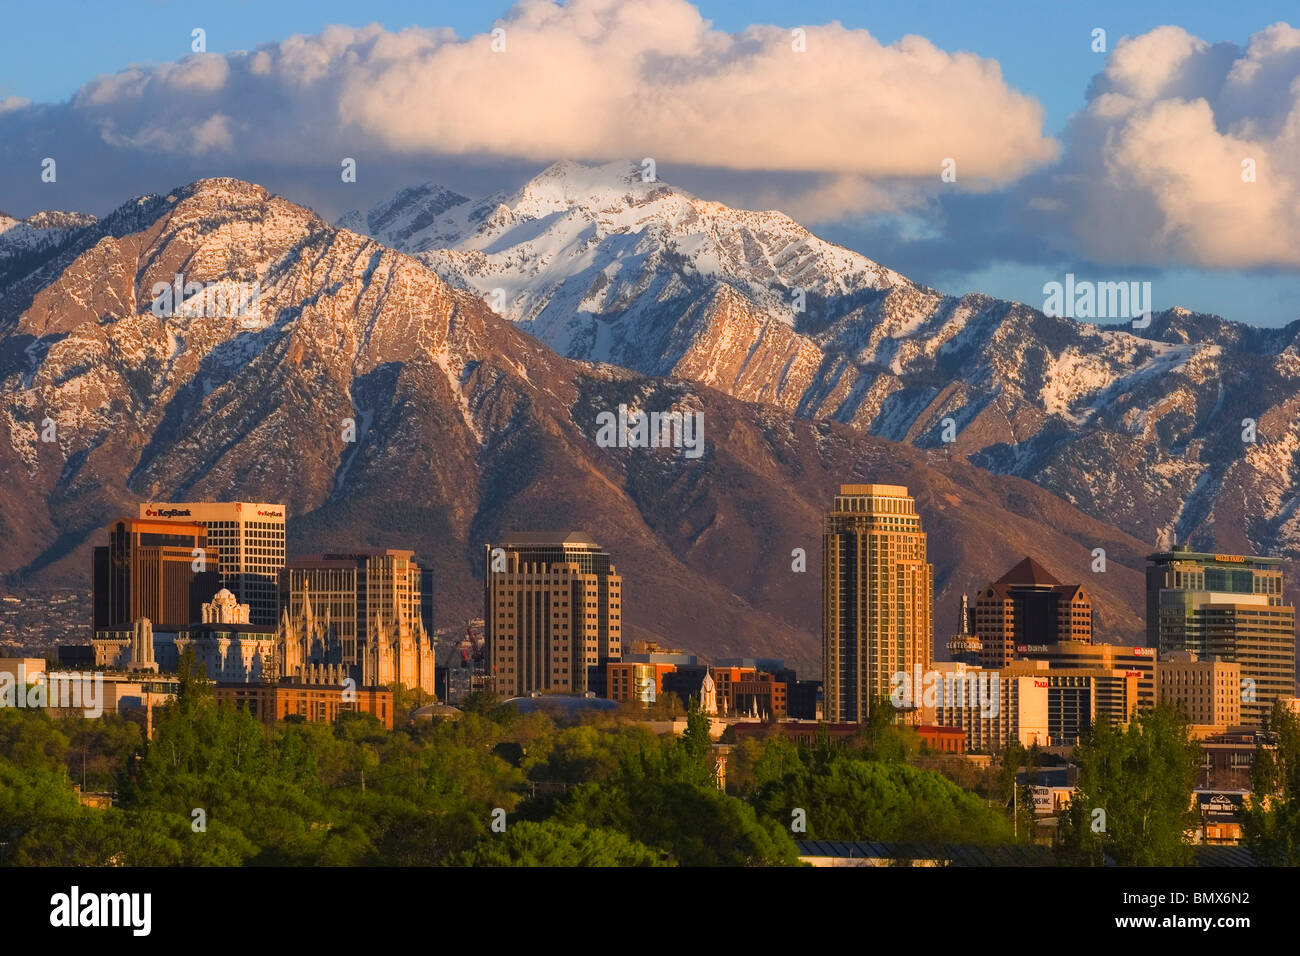 Salt Lake City Utah skyline showing downtown buildings and the snow-covered Wasatch Mountains in the background. Stock Photo